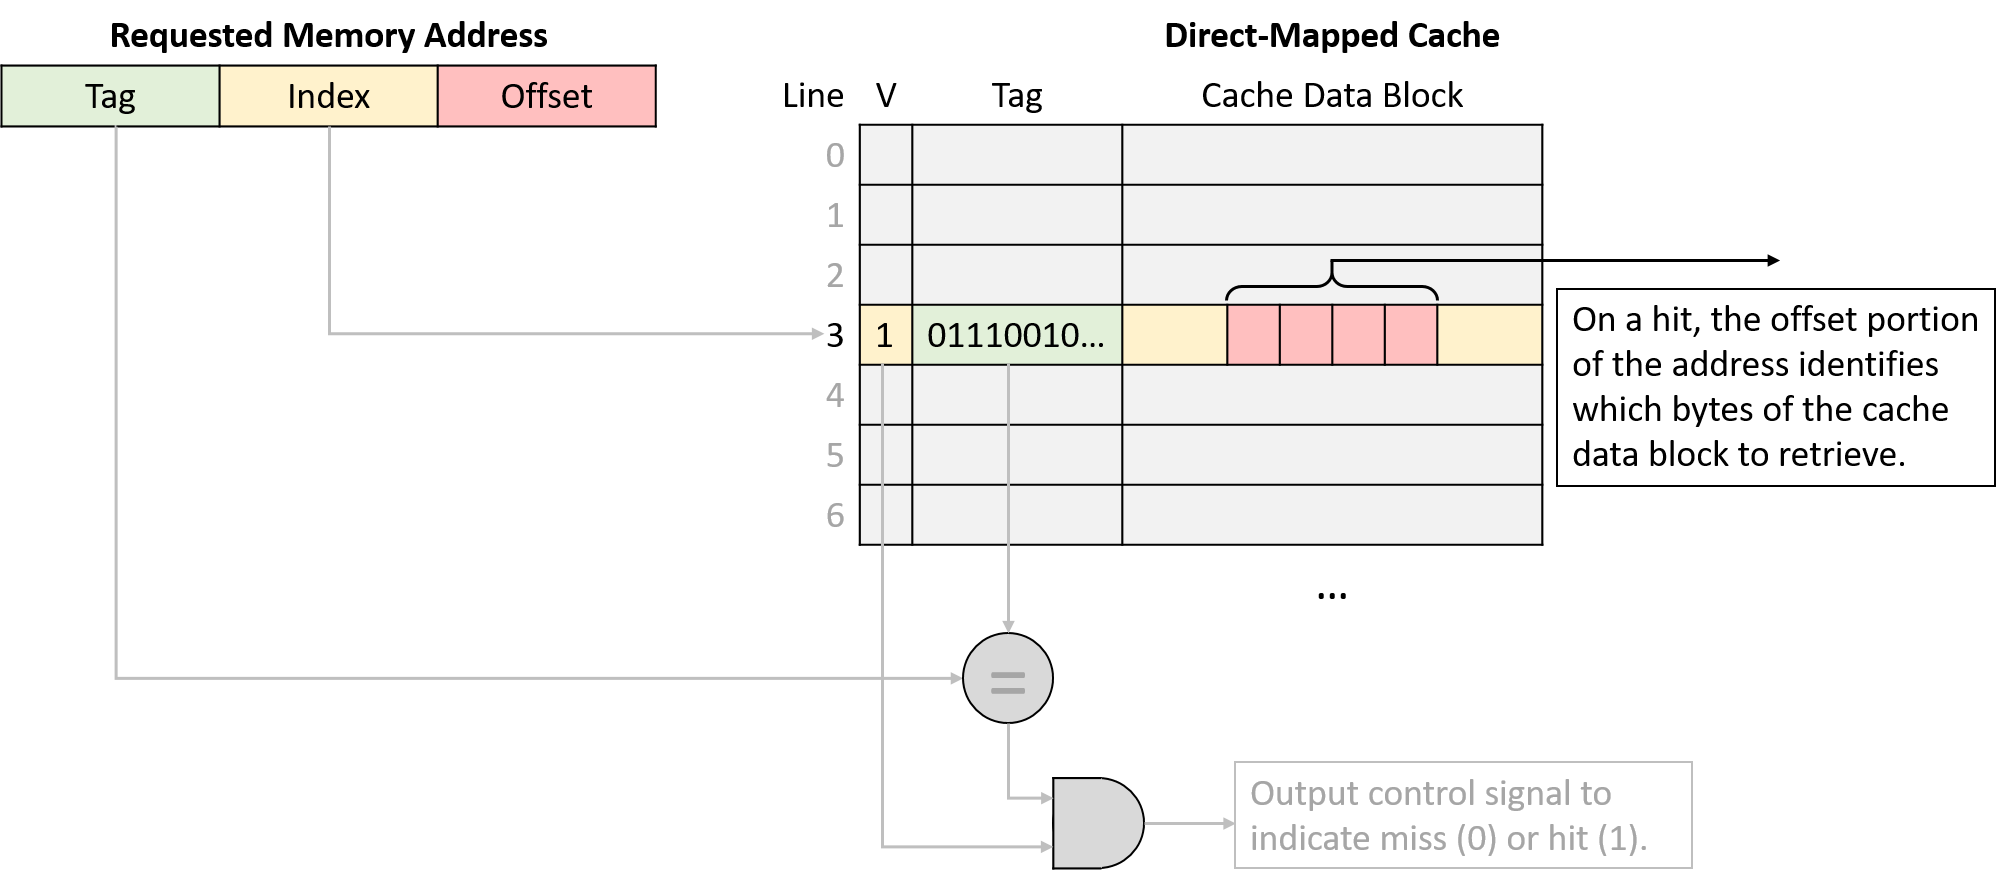 A subset of the cache data block’s cells are highlighted to match the color of an address’s offset portion.